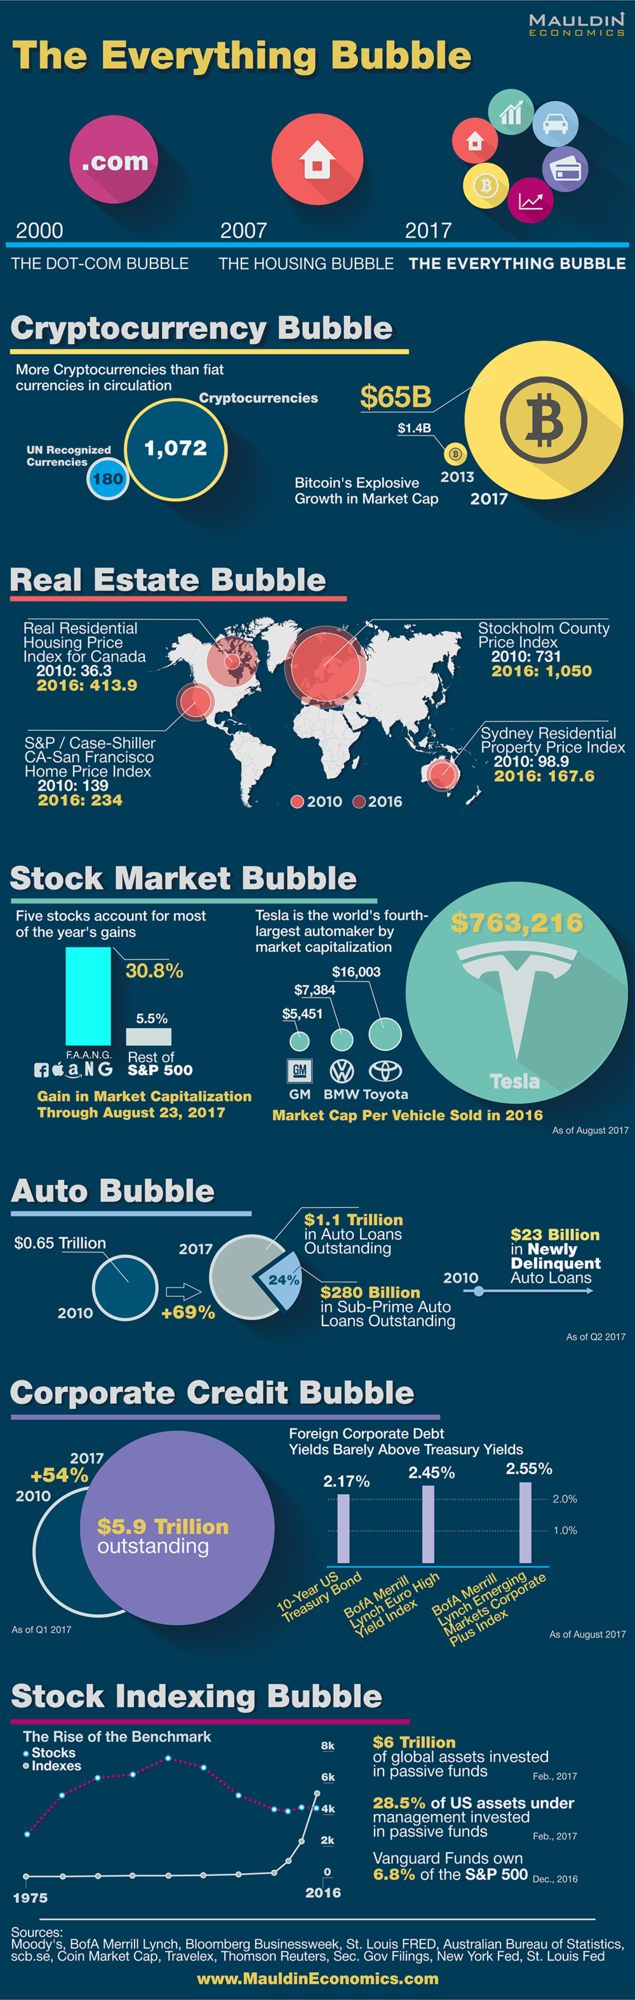 170919_Bubble_infographic_newfinal600.png